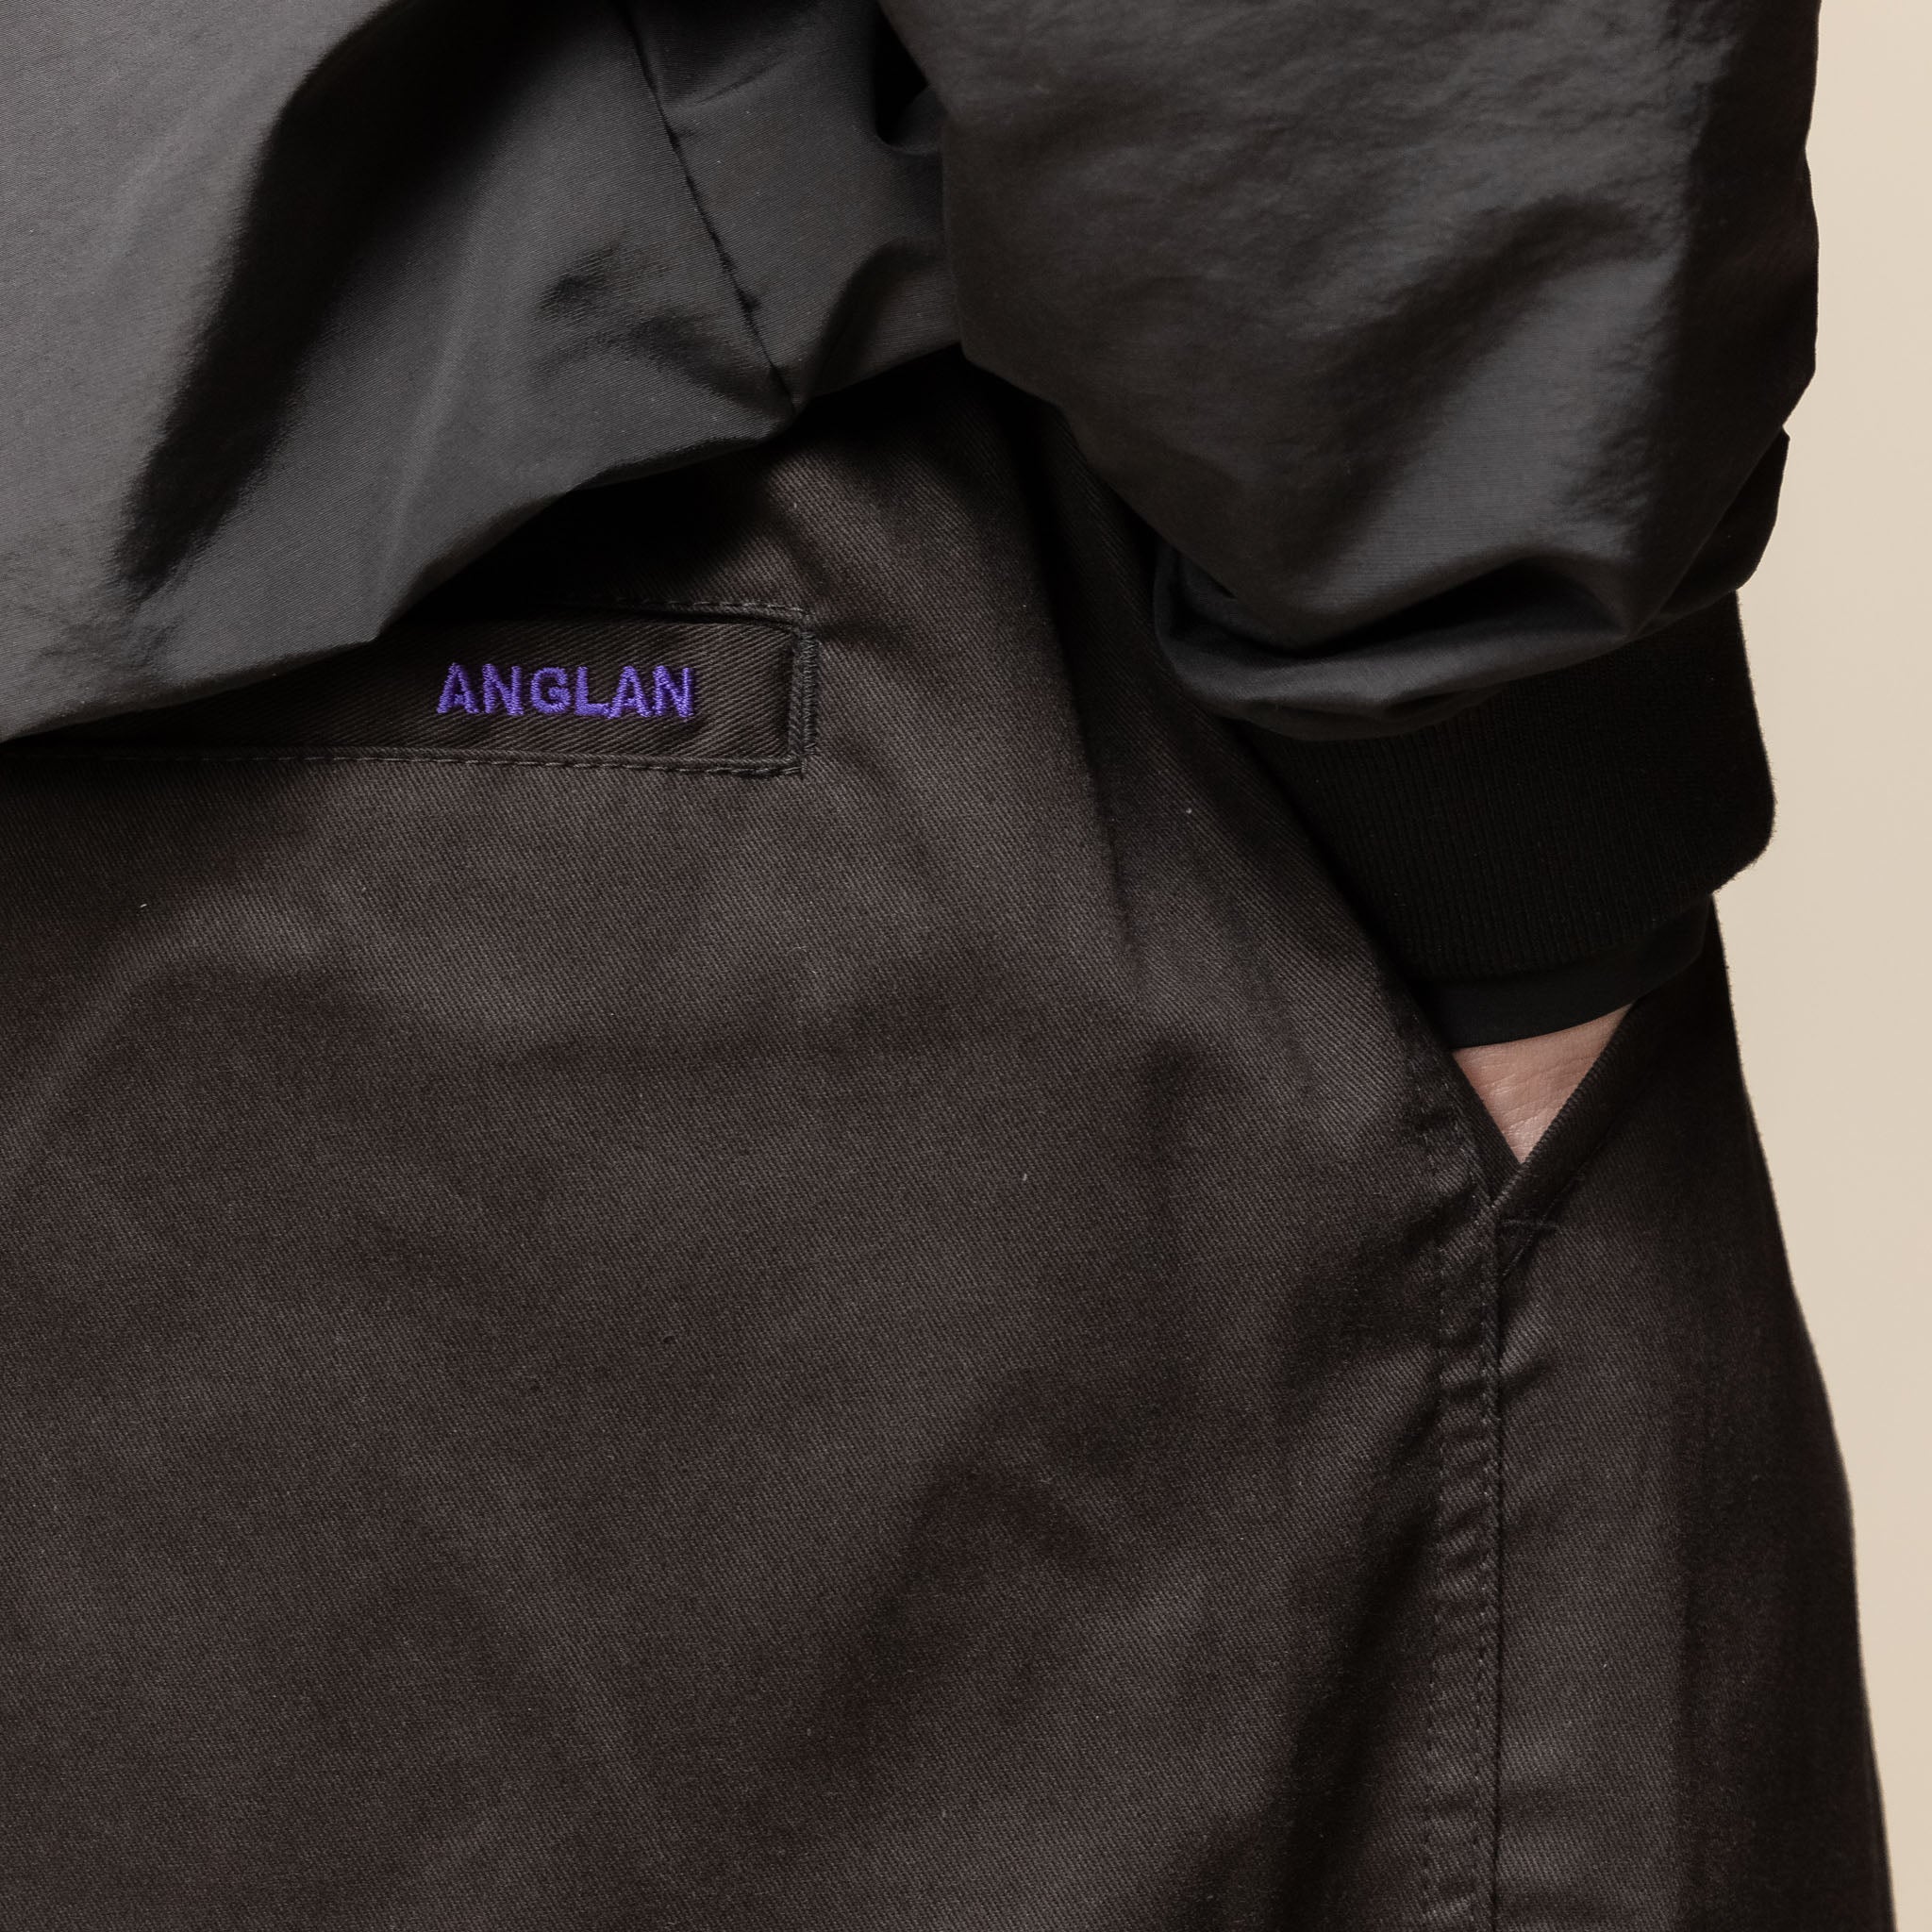 Anglan - Cotton Twill Belted Balloon Pants - Black "Anglan pants" "Anglan stockists" "Anglan website"